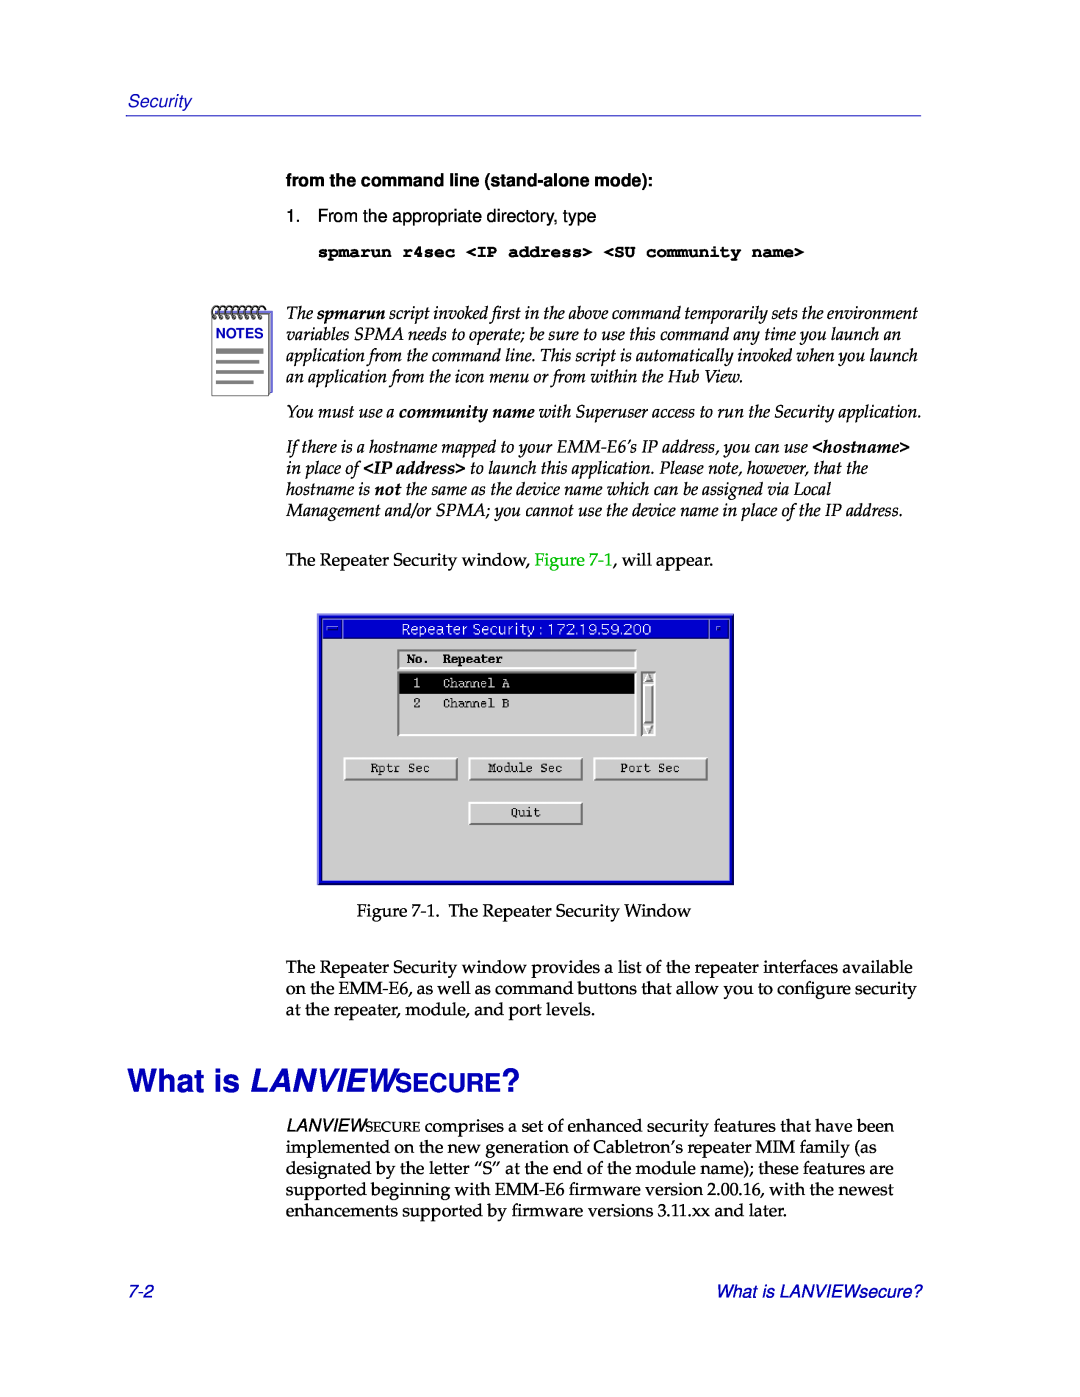 Cabletron Systems EMM-E6 manual What is LANVIEWSECURE?, Security, spmarun r4sec IP address SU community name 